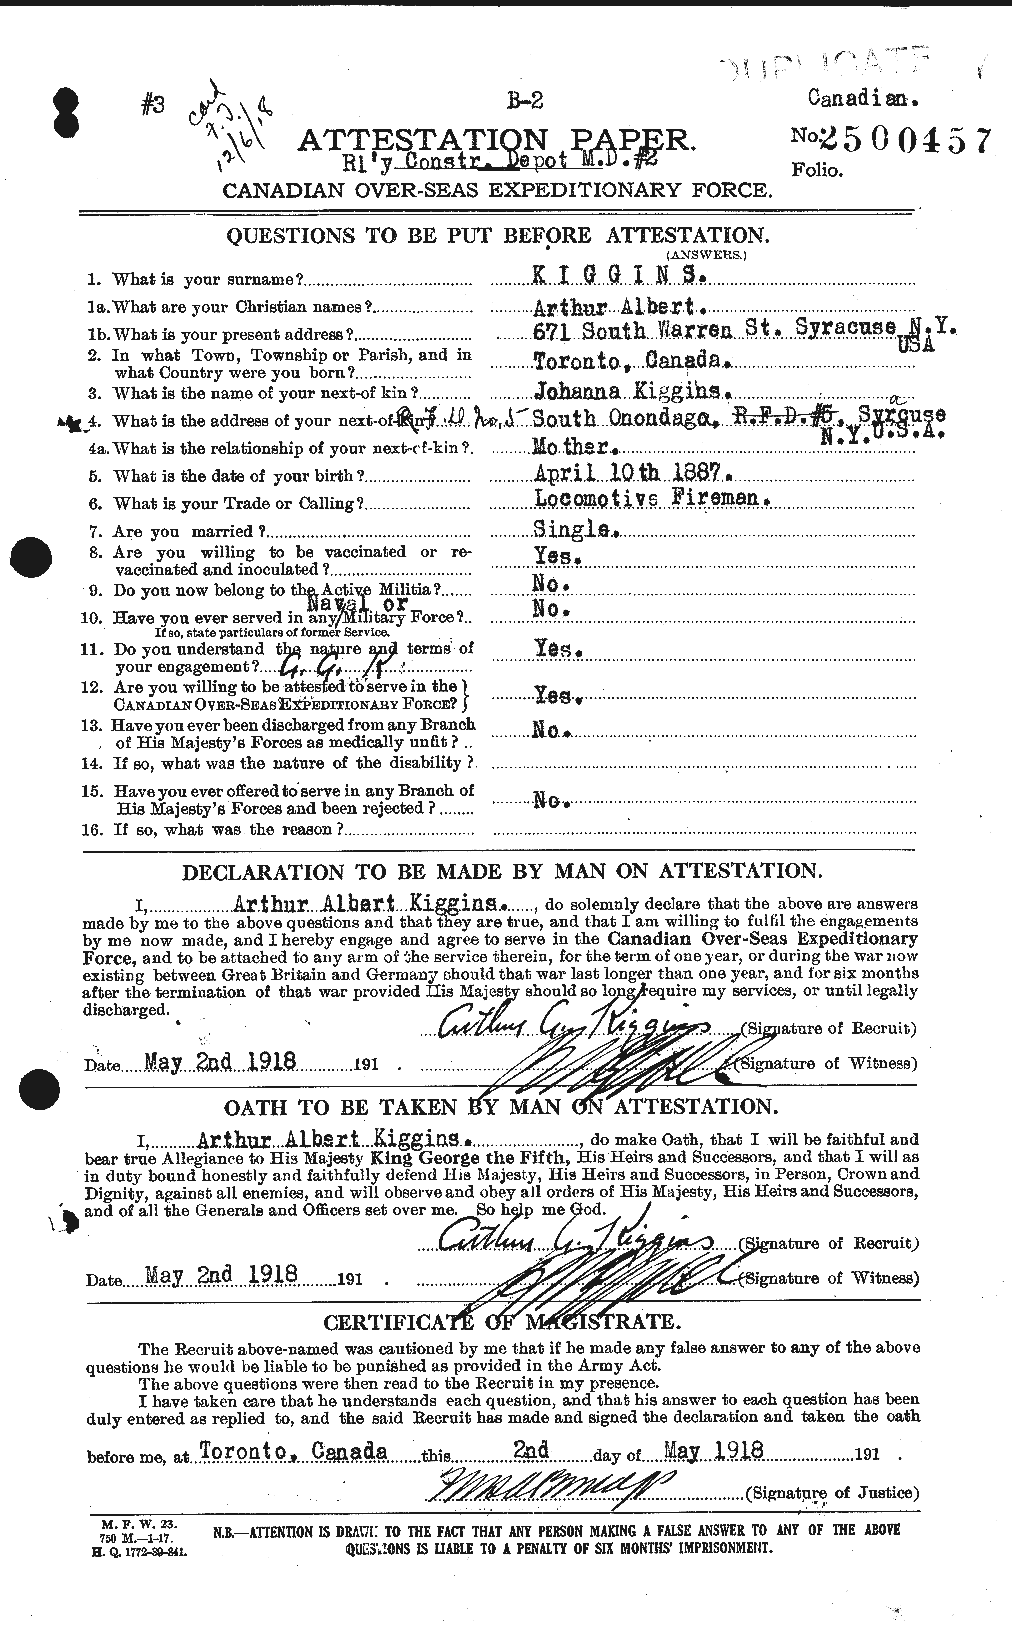 Personnel Records of the First World War - CEF 438907a